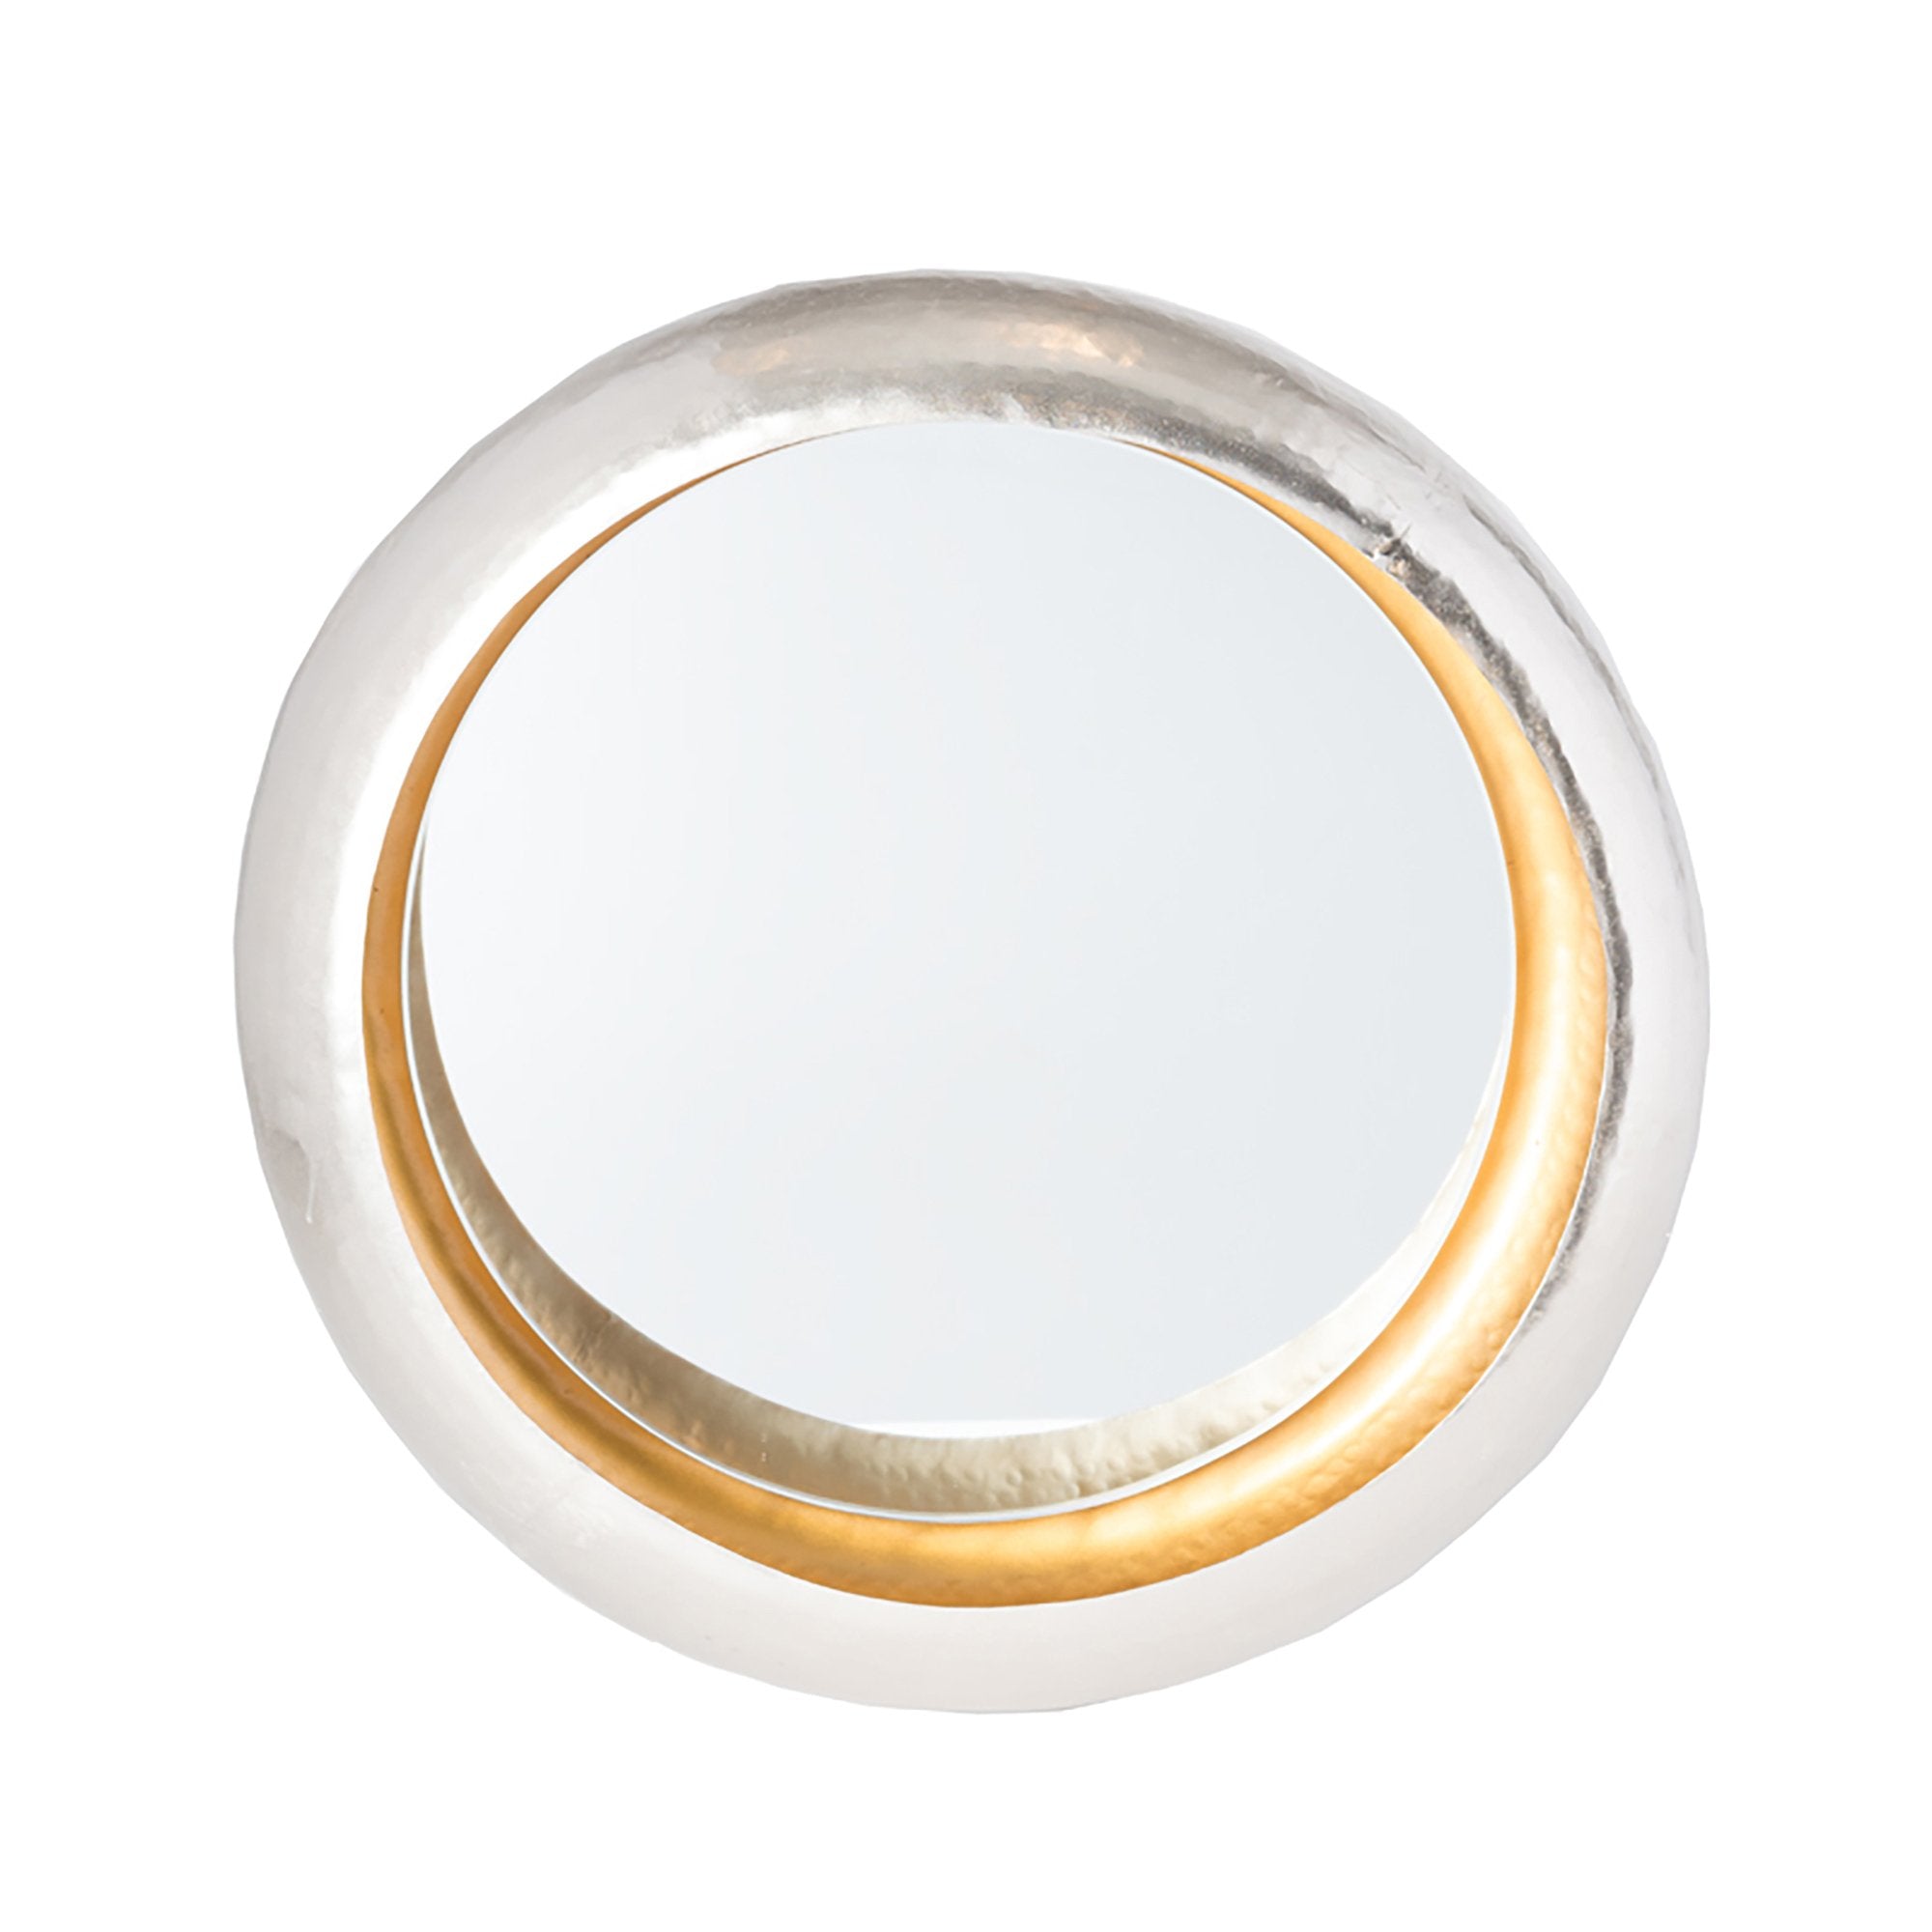 Picture of Earth Wind & Fire Circular Wall Mirror - Small